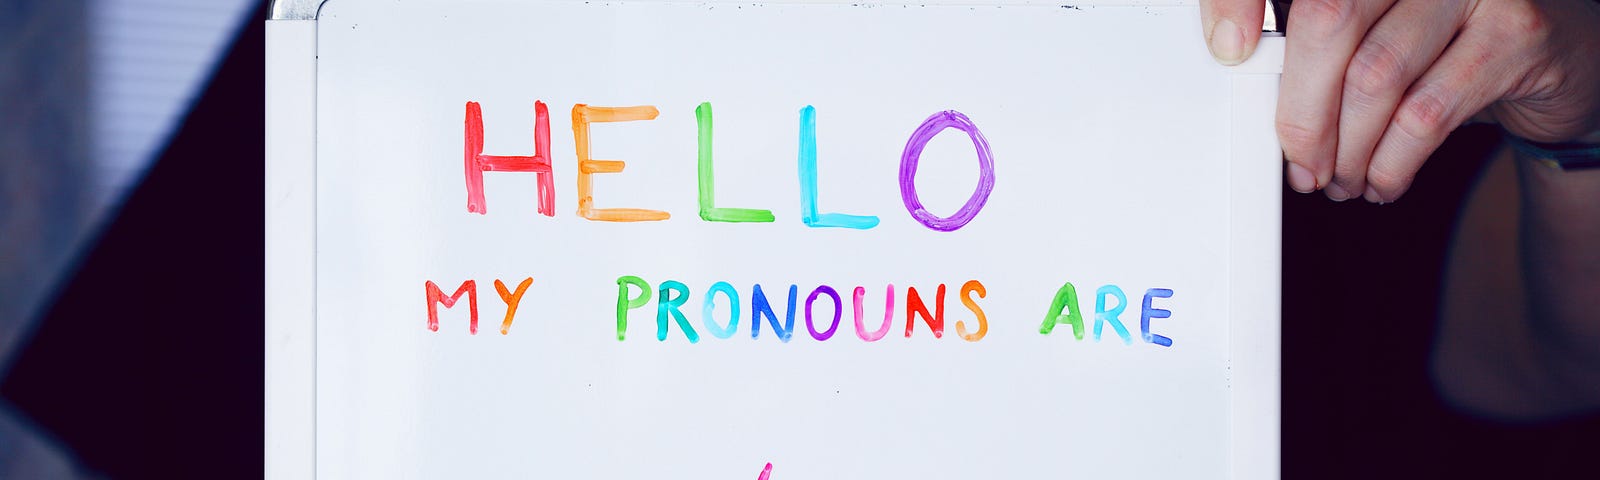 person holding whiteboard sign with rainbow lettering: HELLO MY PRONOUNS ARE with blank underlines and a slash mark to fill in the pronouns